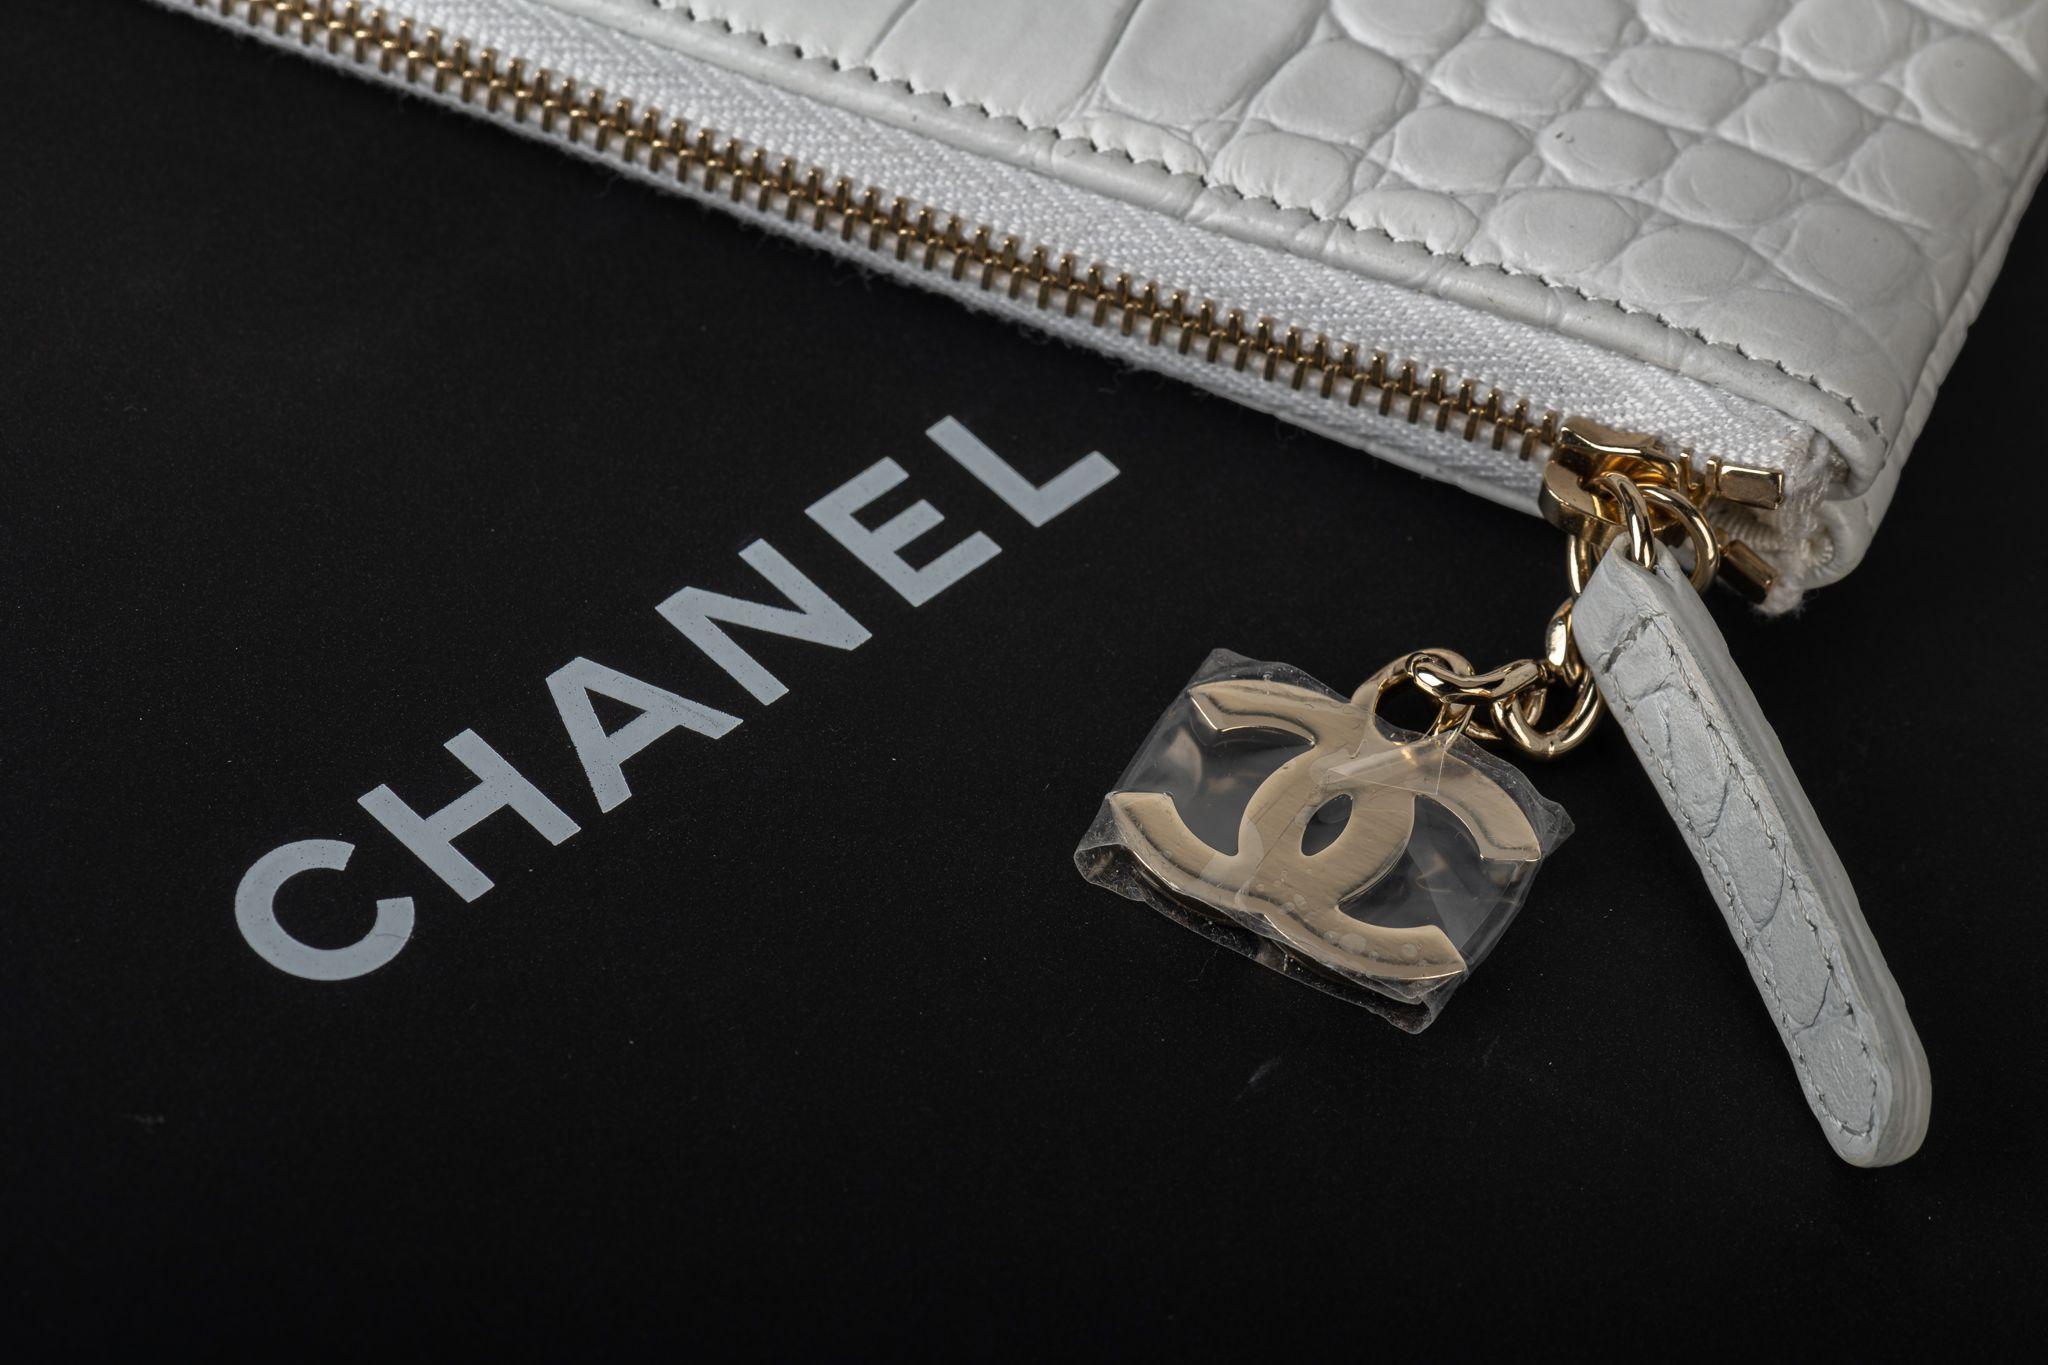 Chanel BNIB White Croc Print Clutch In New Condition For Sale In West Hollywood, CA